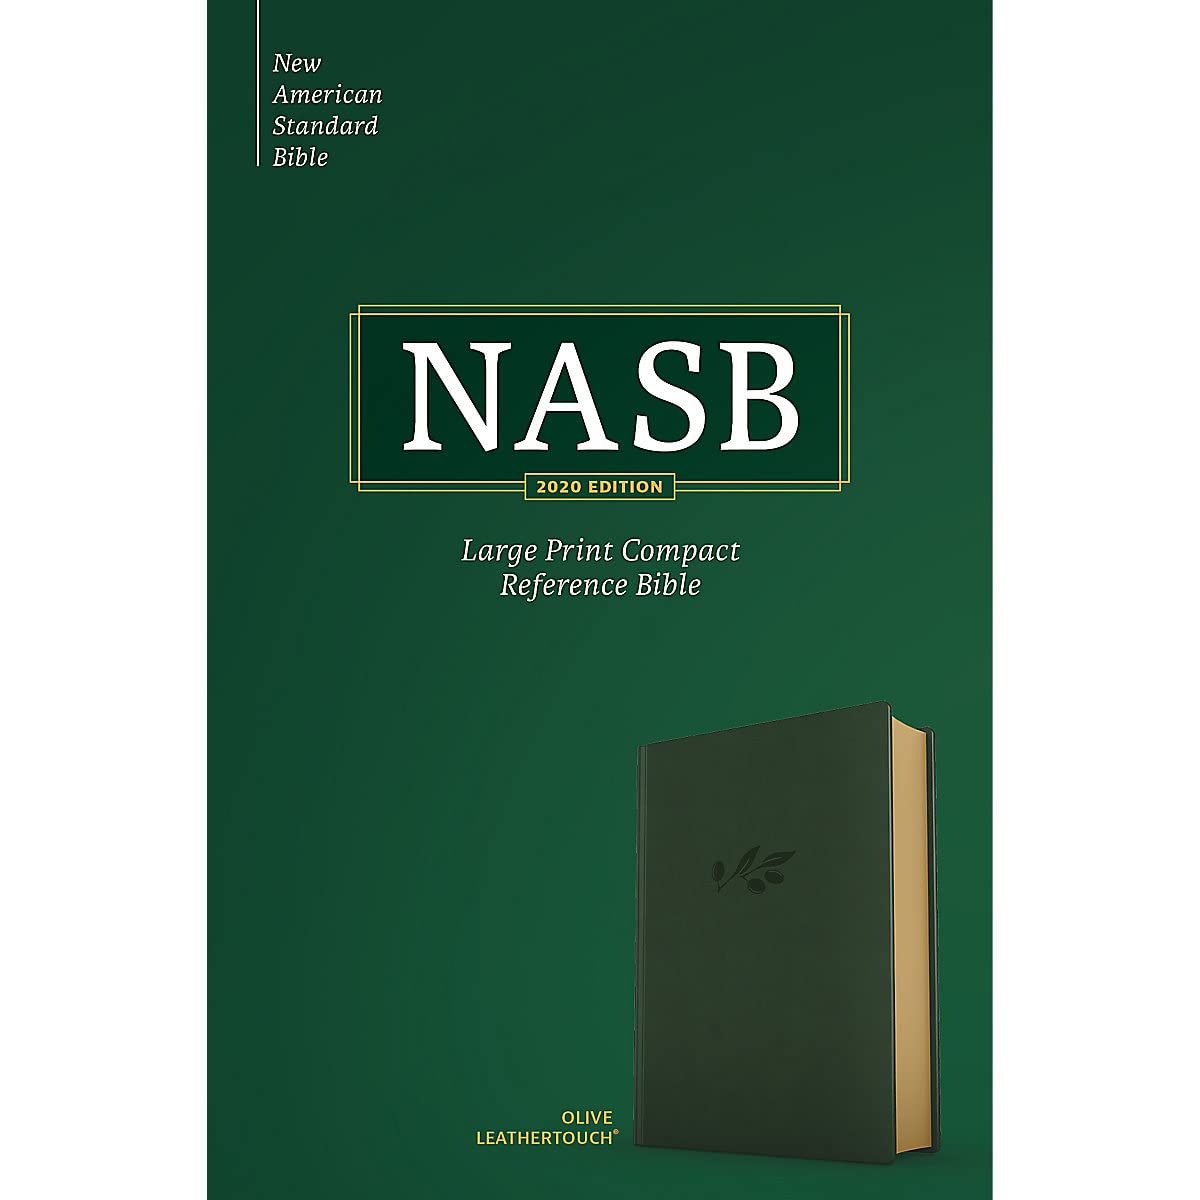 NASB Large Print Compact Reference Bible, Olive Leathertouch, Red Letter, Presentation Page, Cross-References, Full-Color Maps, Easy-to-Read Bible Karmina Type